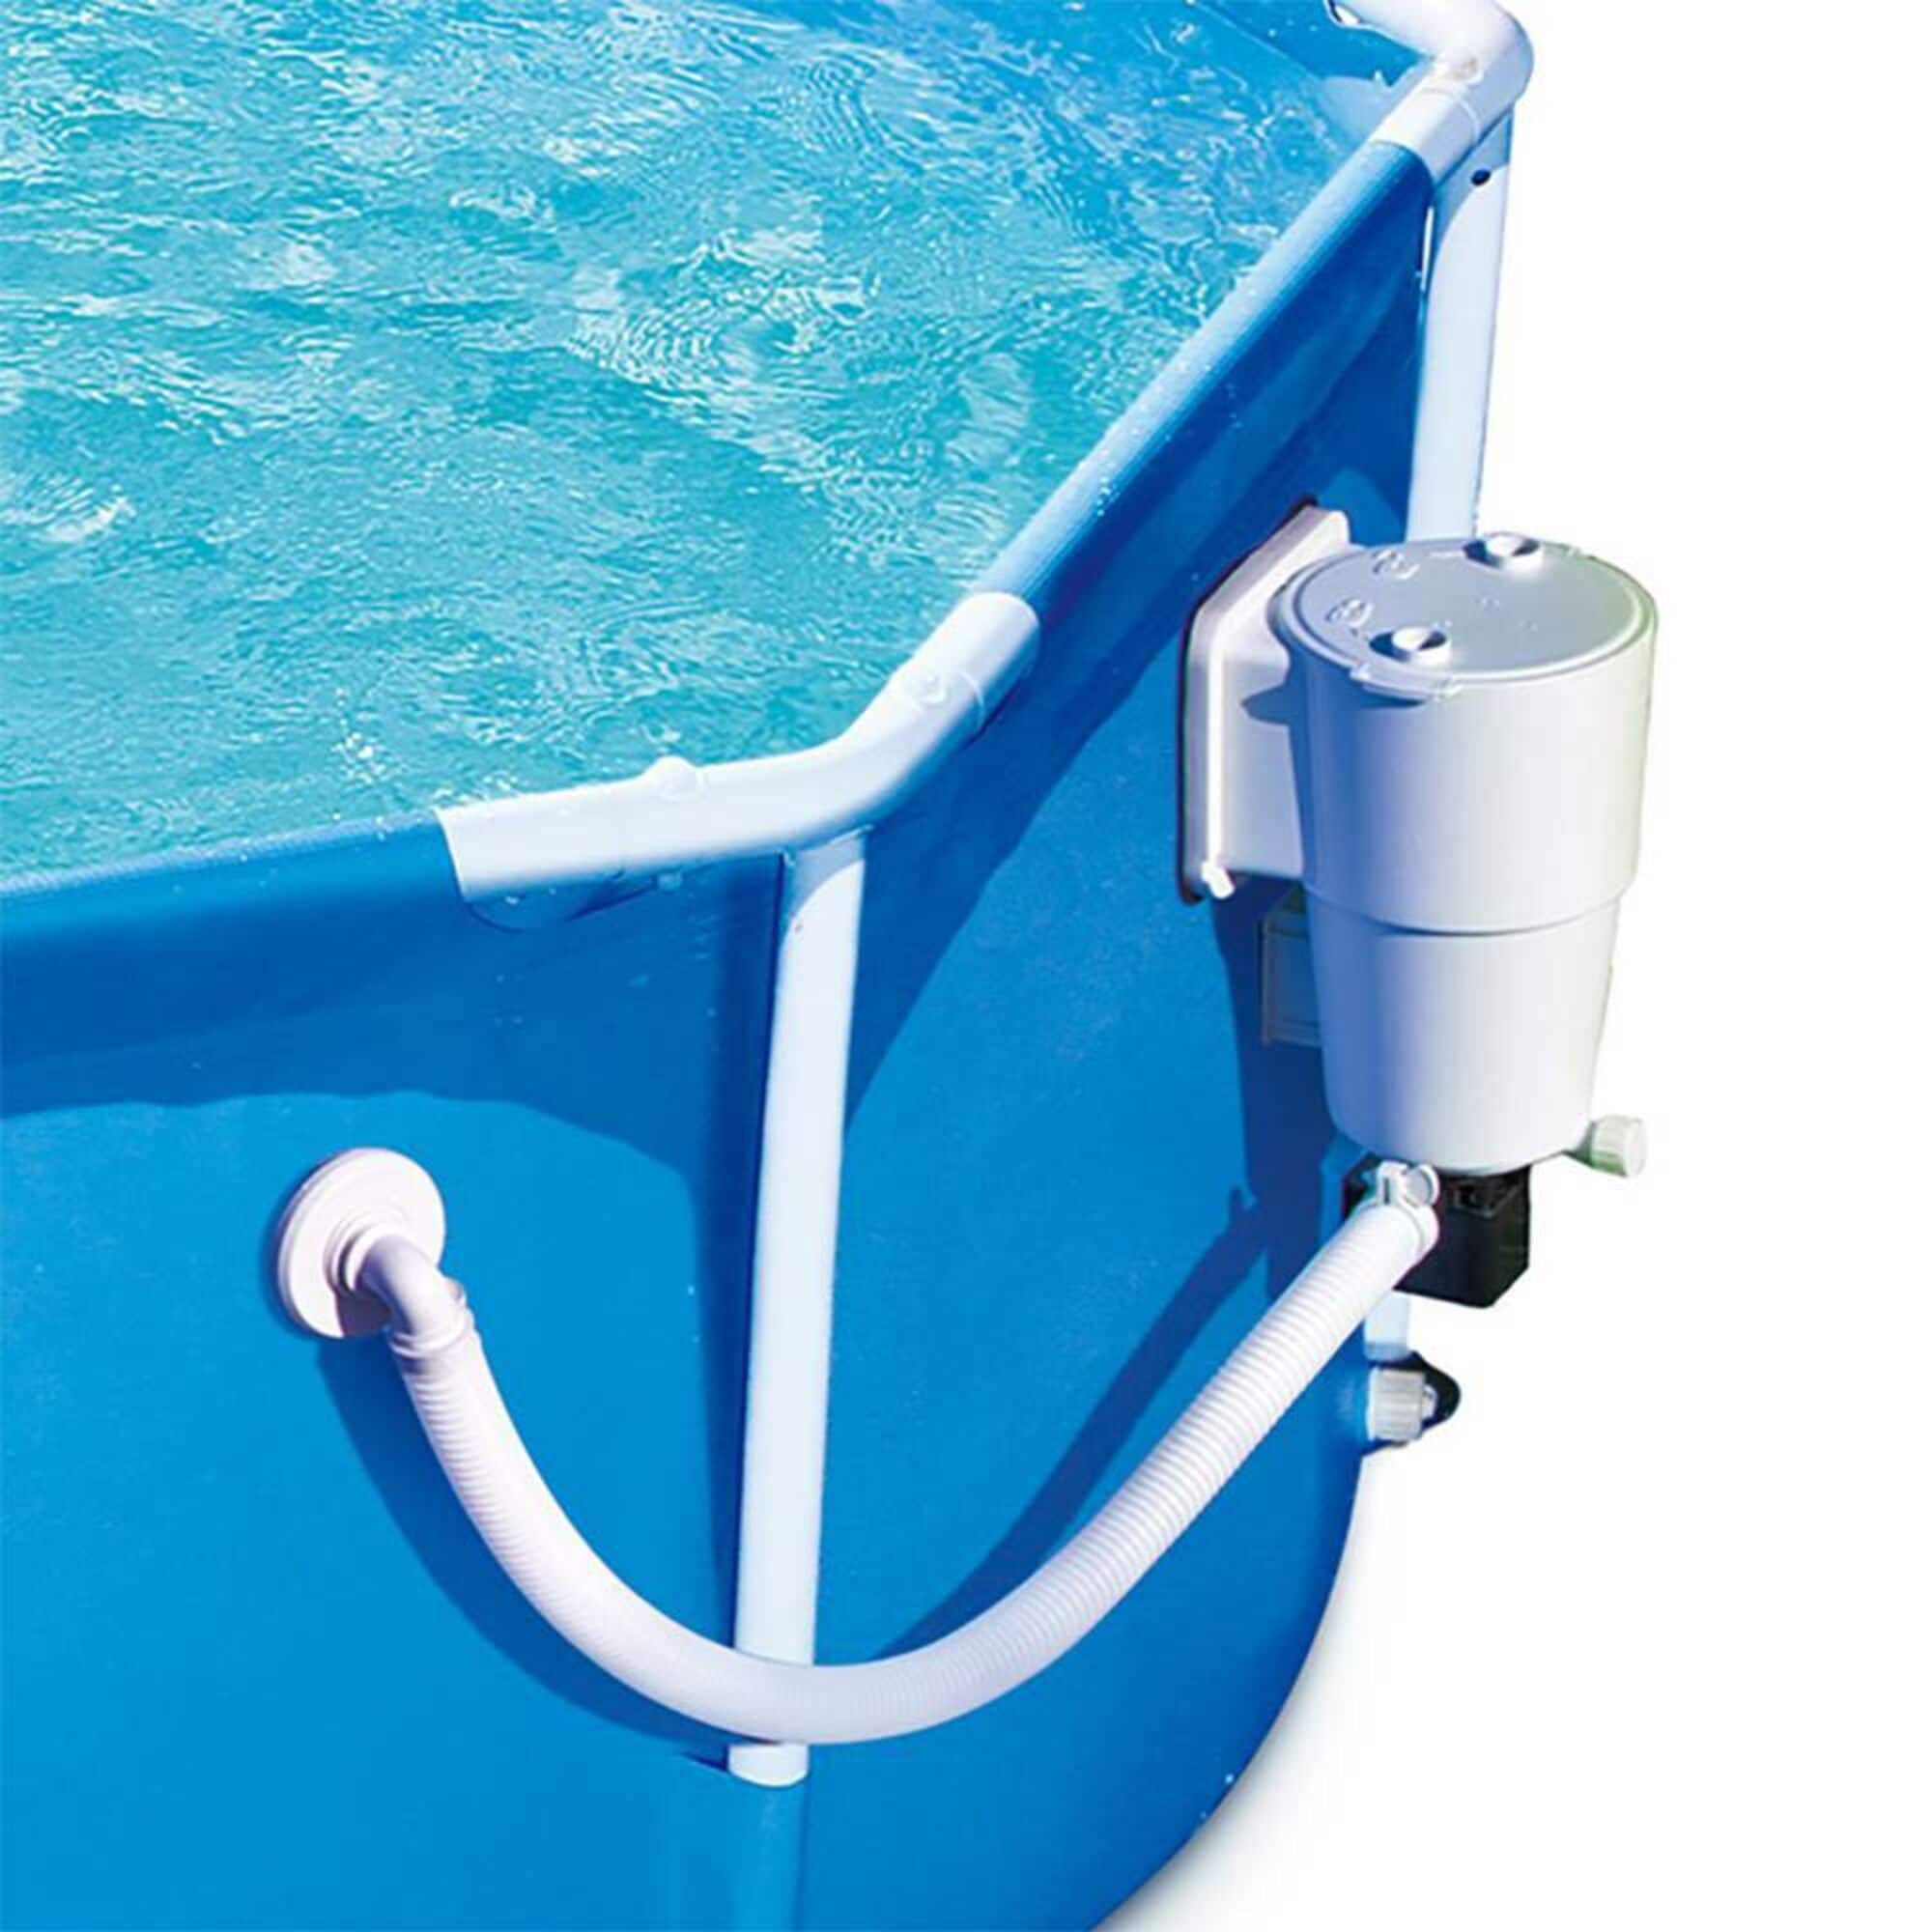 2023 Summer waves 10ft pool pump instructions are Terms 